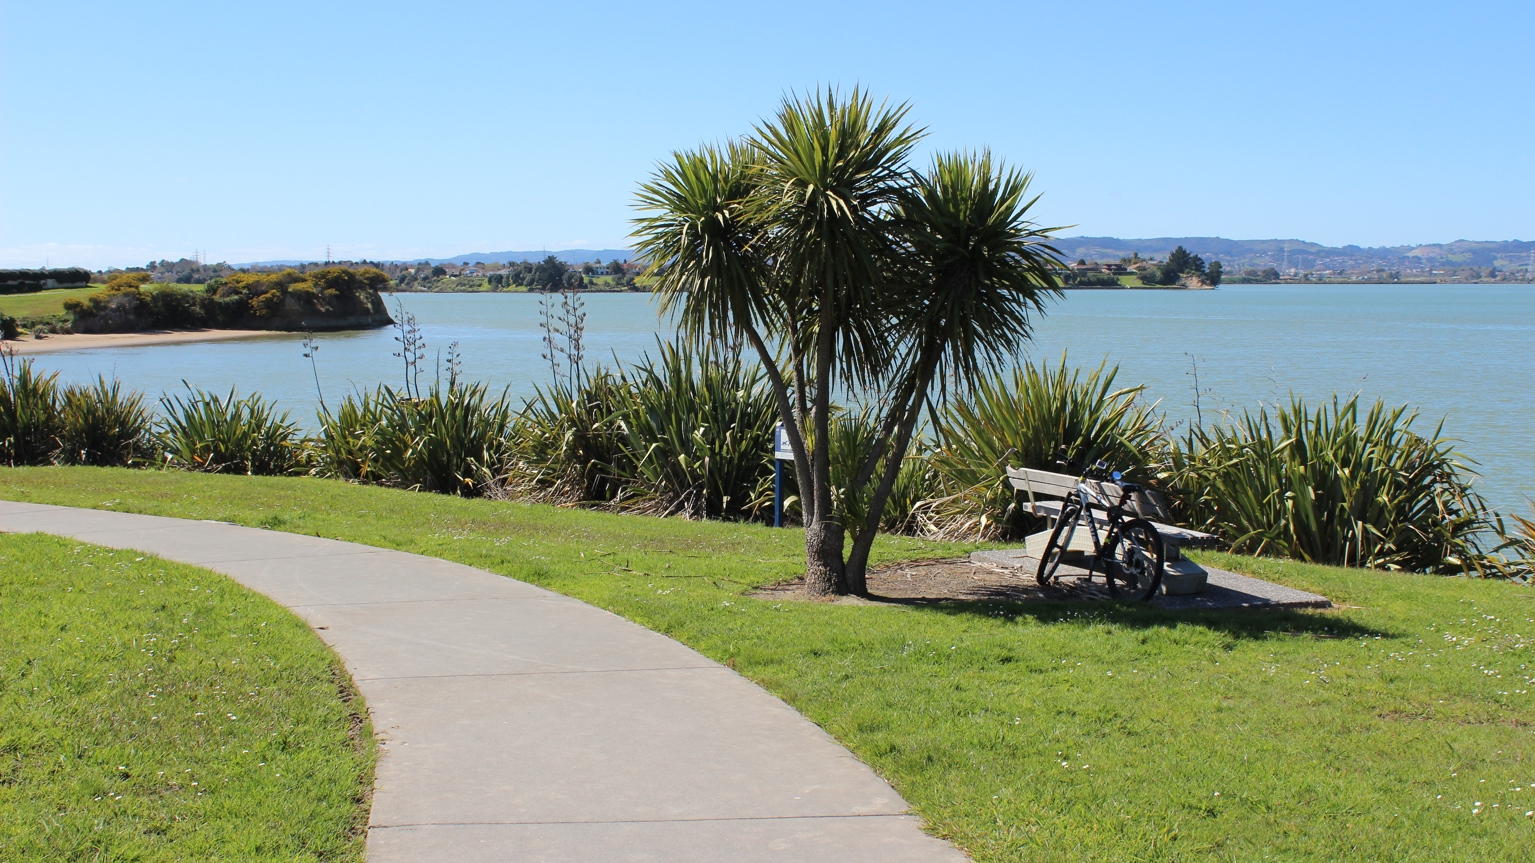 A flat, concrete path through a park by the water. There is a seat by a tree on the right to stop and rest.